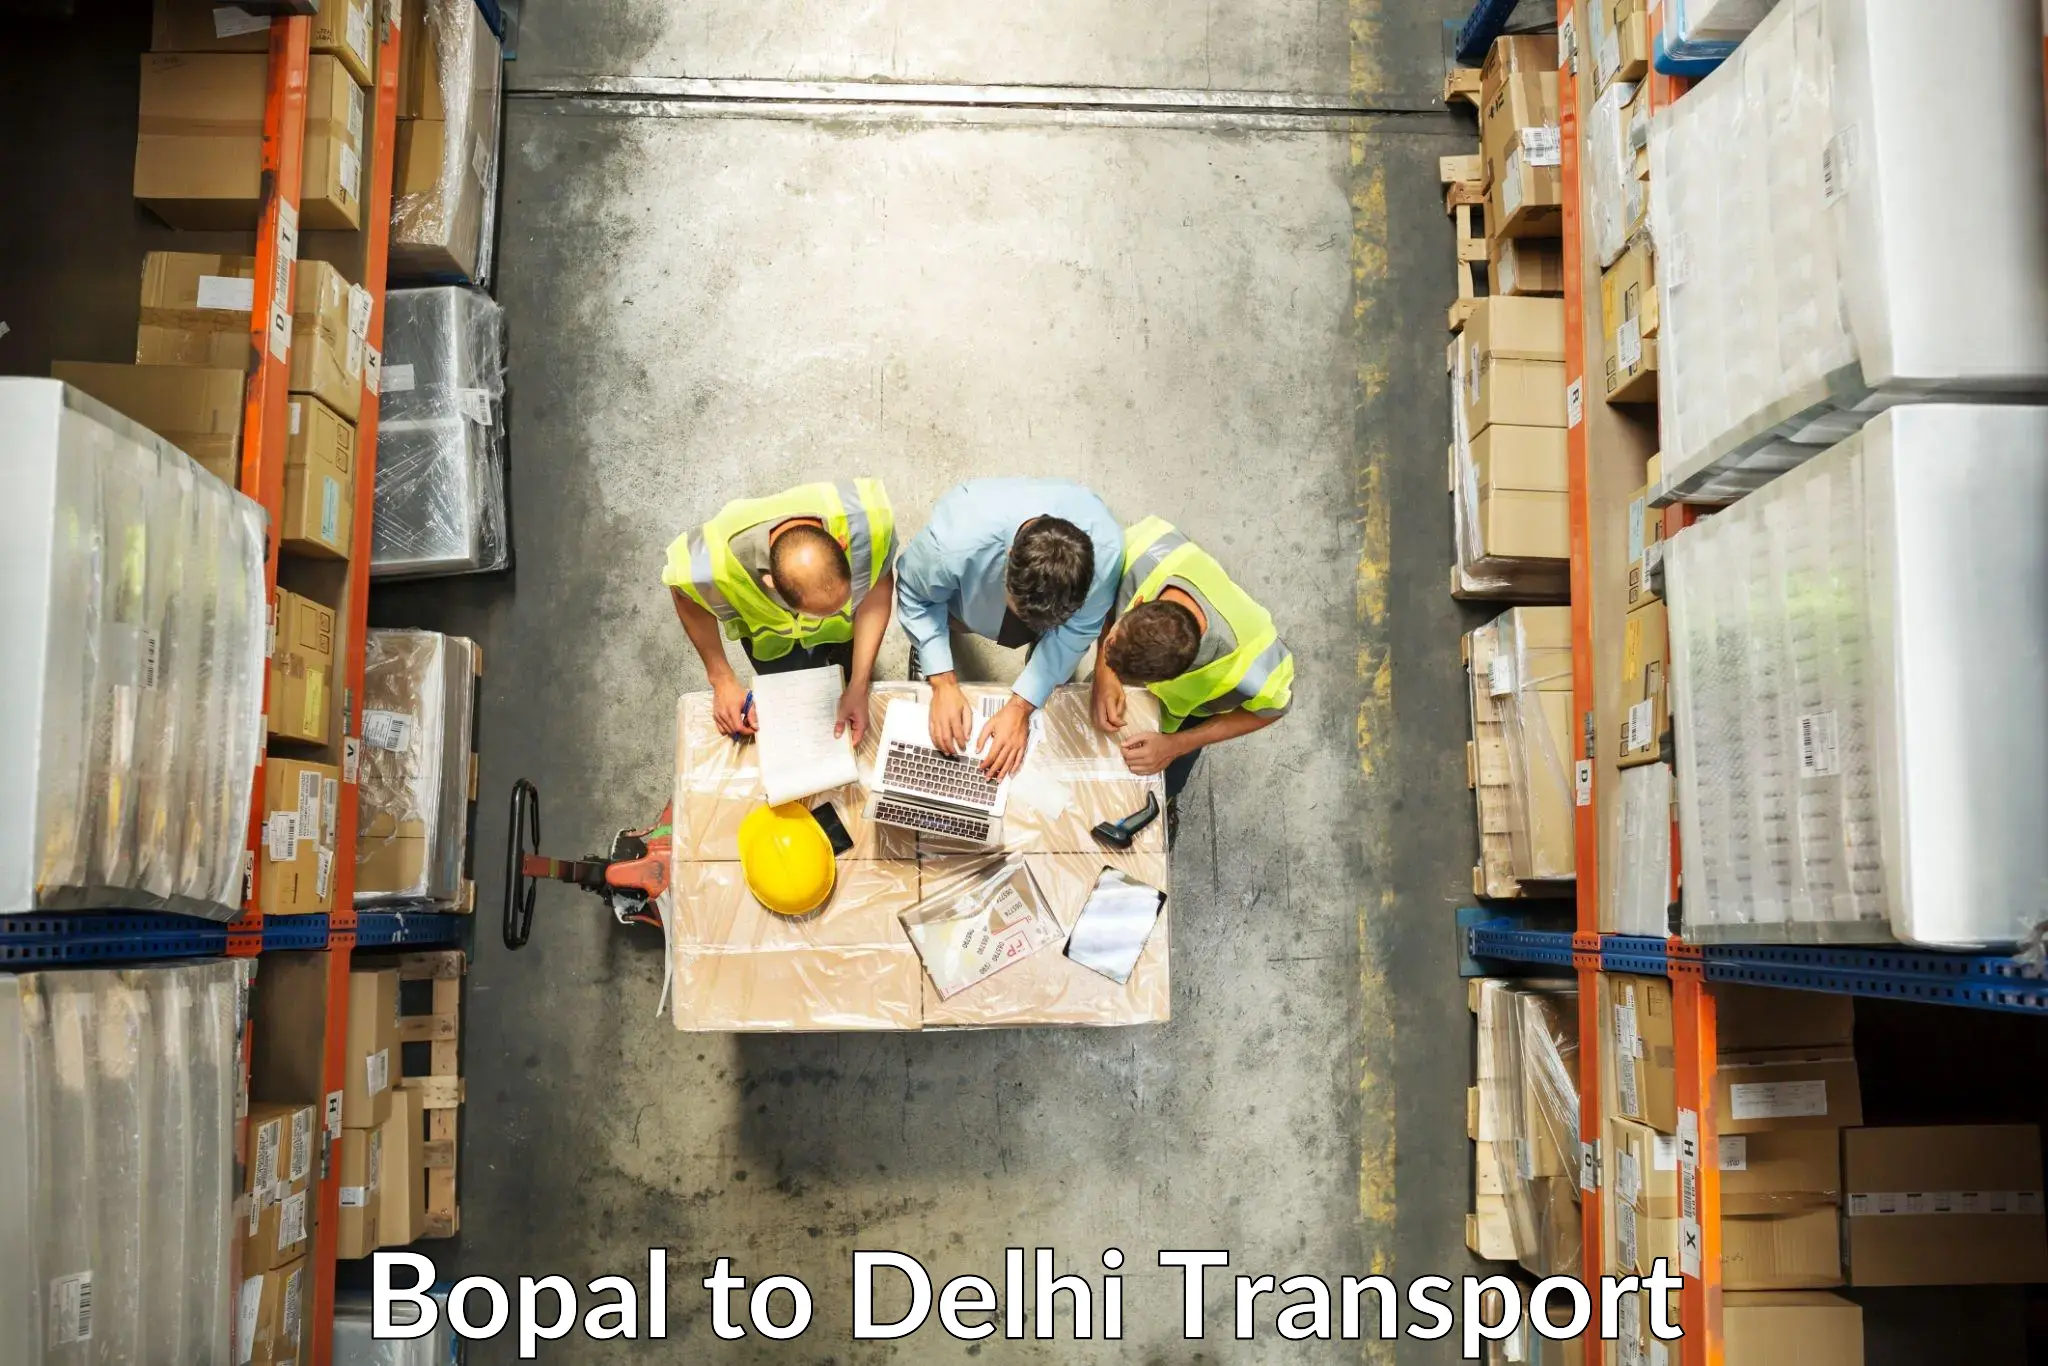 Truck transport companies in India Bopal to Jhilmil